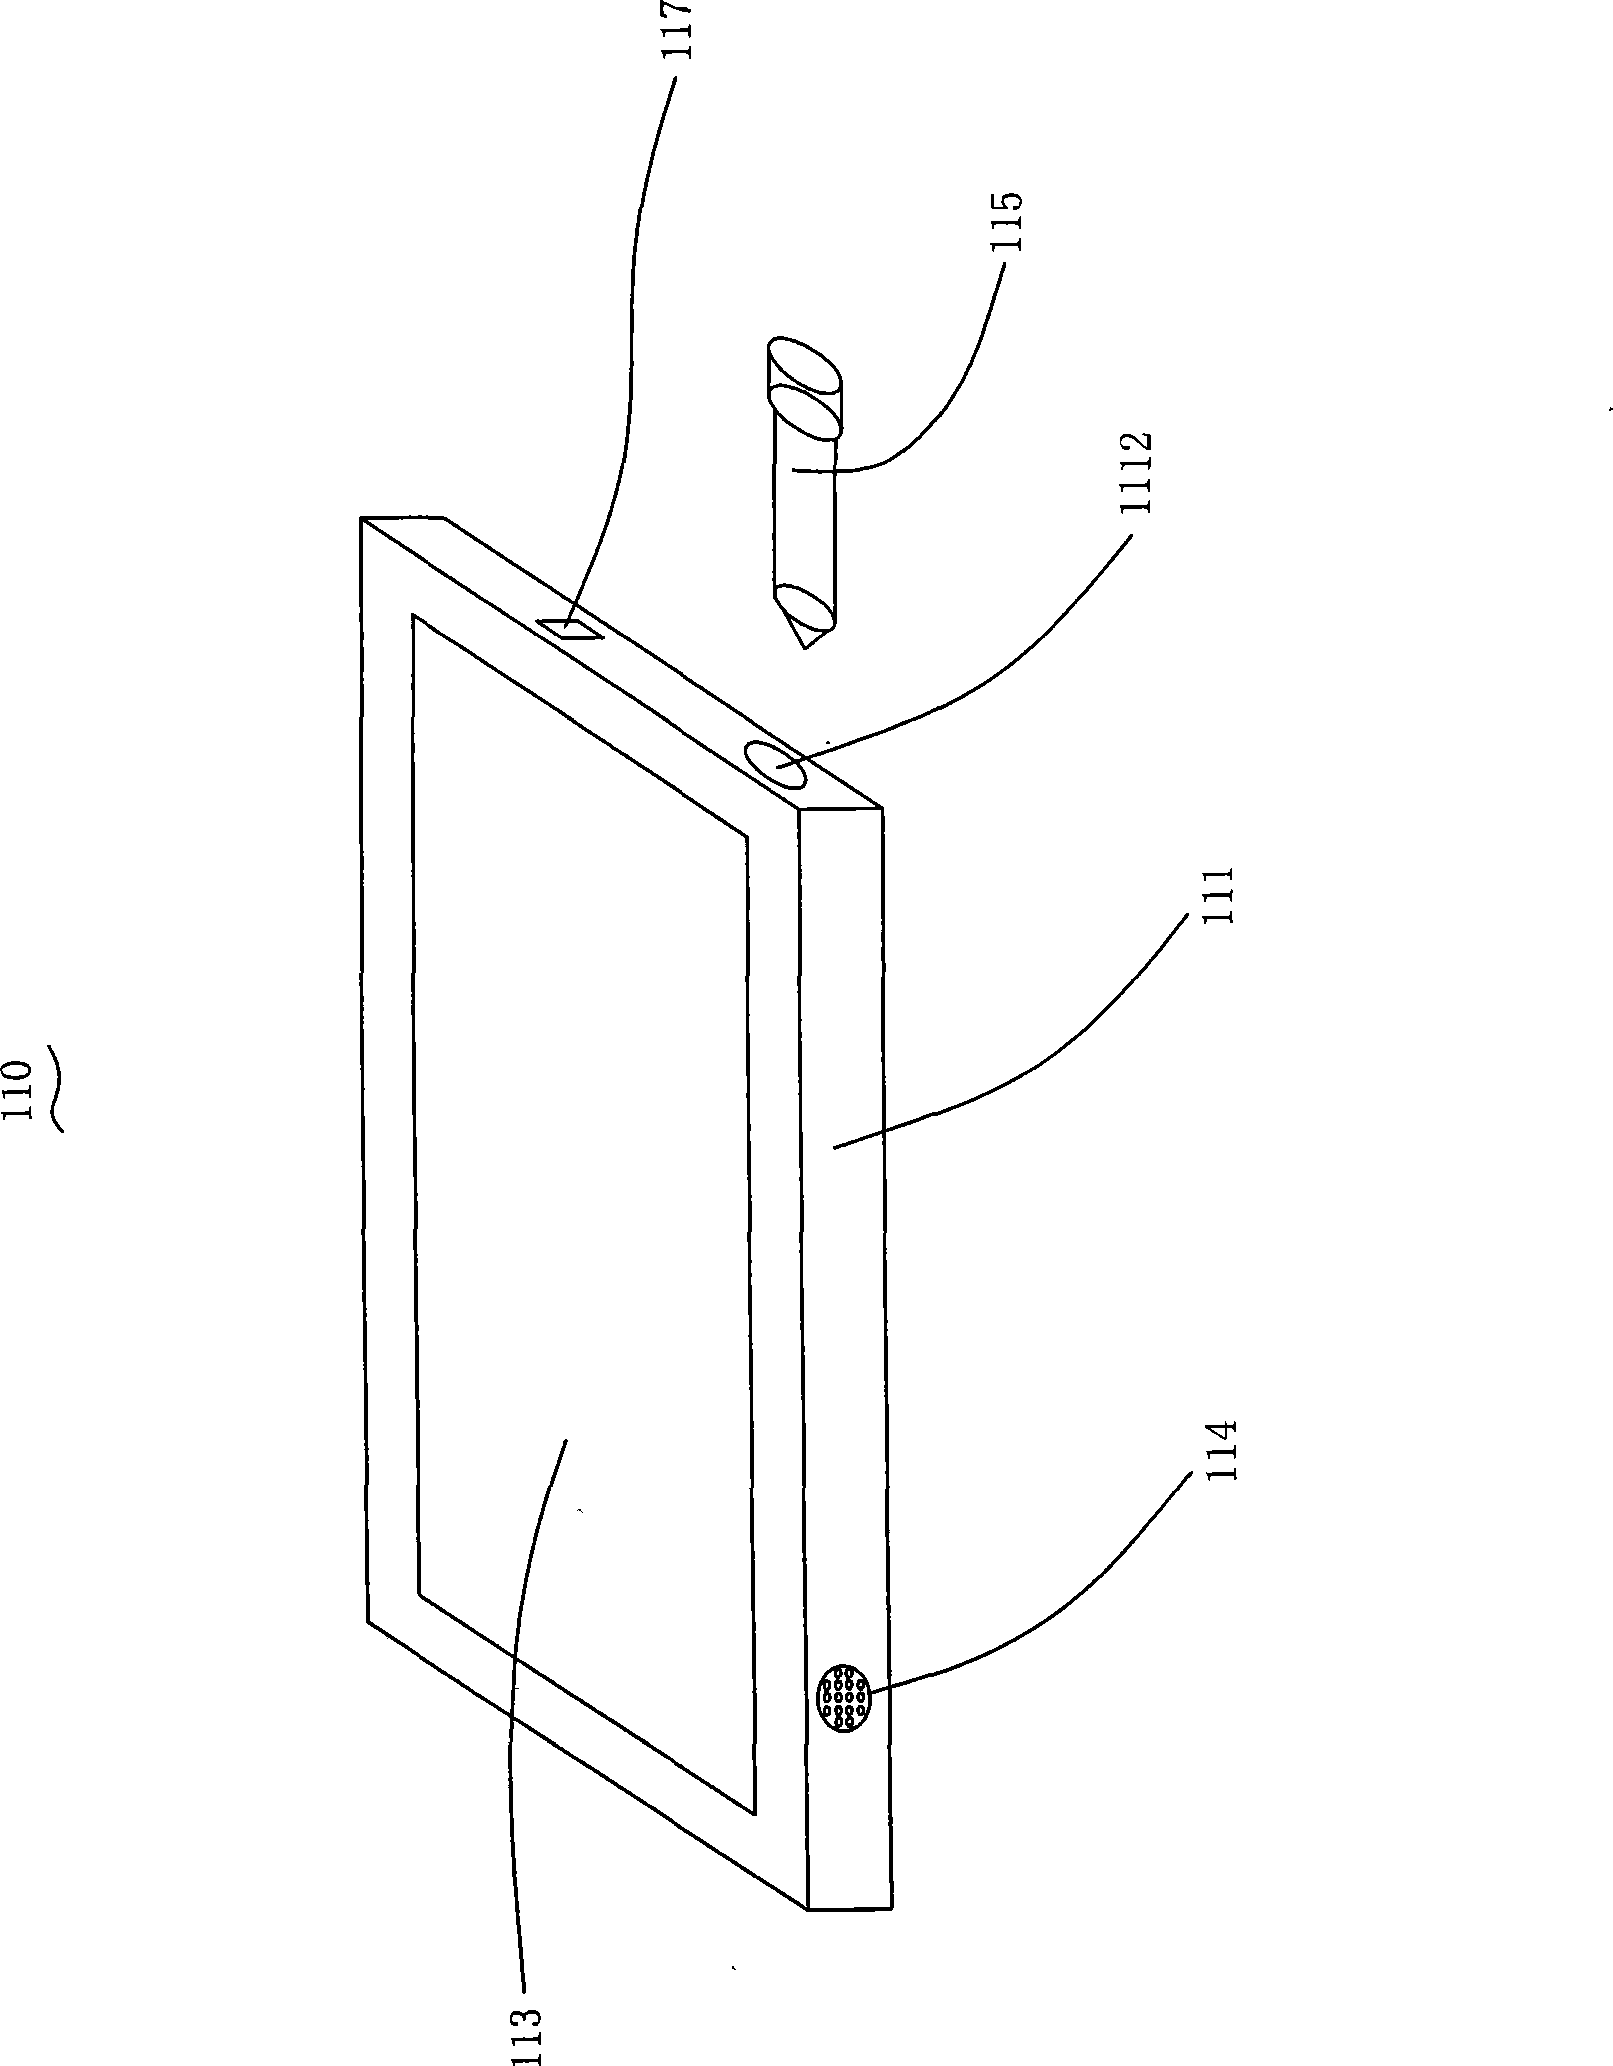 Multi-channel audio and video network processing system for social culture and art communication